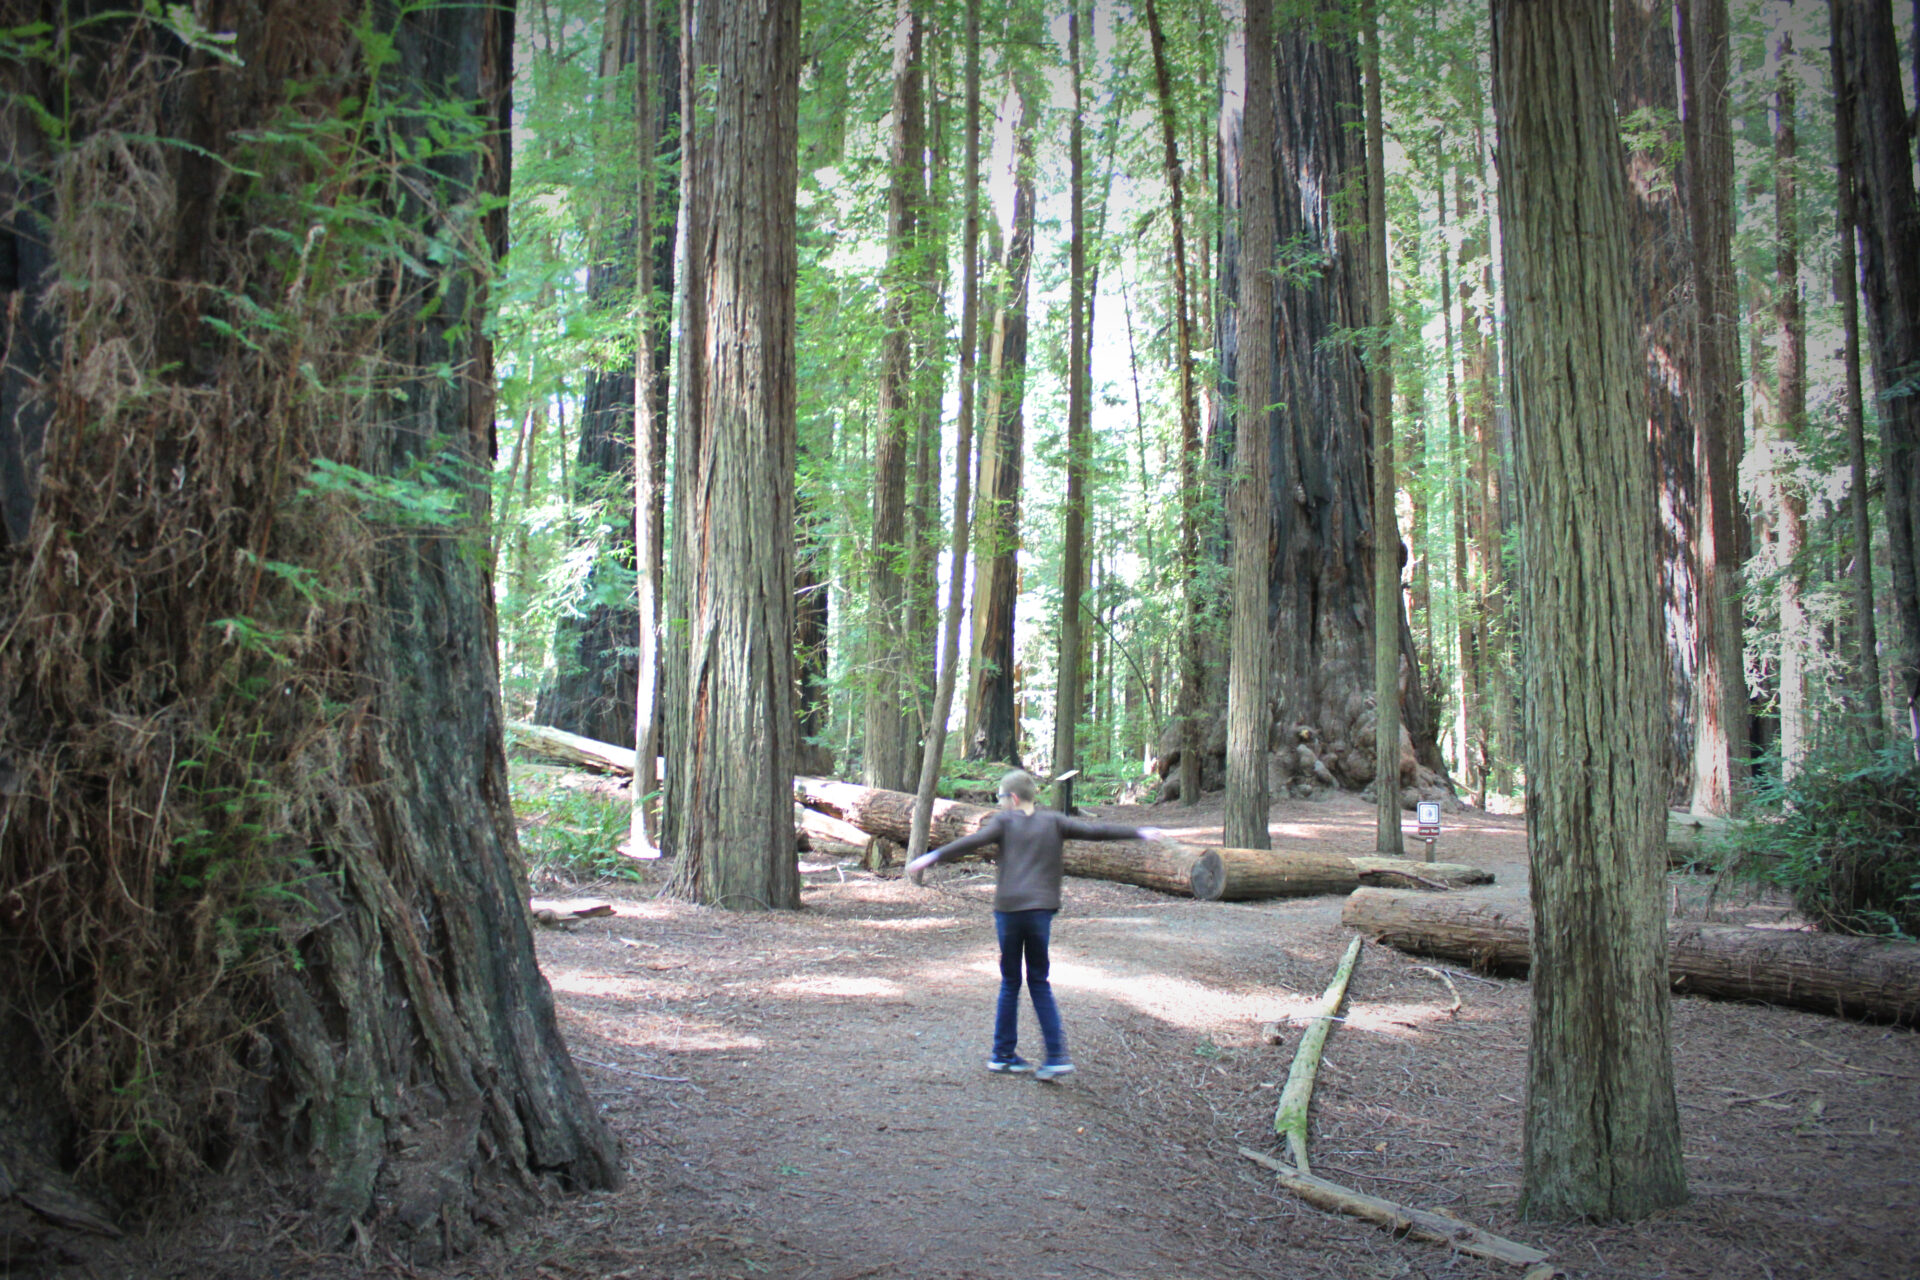 Visiting the Redwood National Park: Why We Dream About This Place